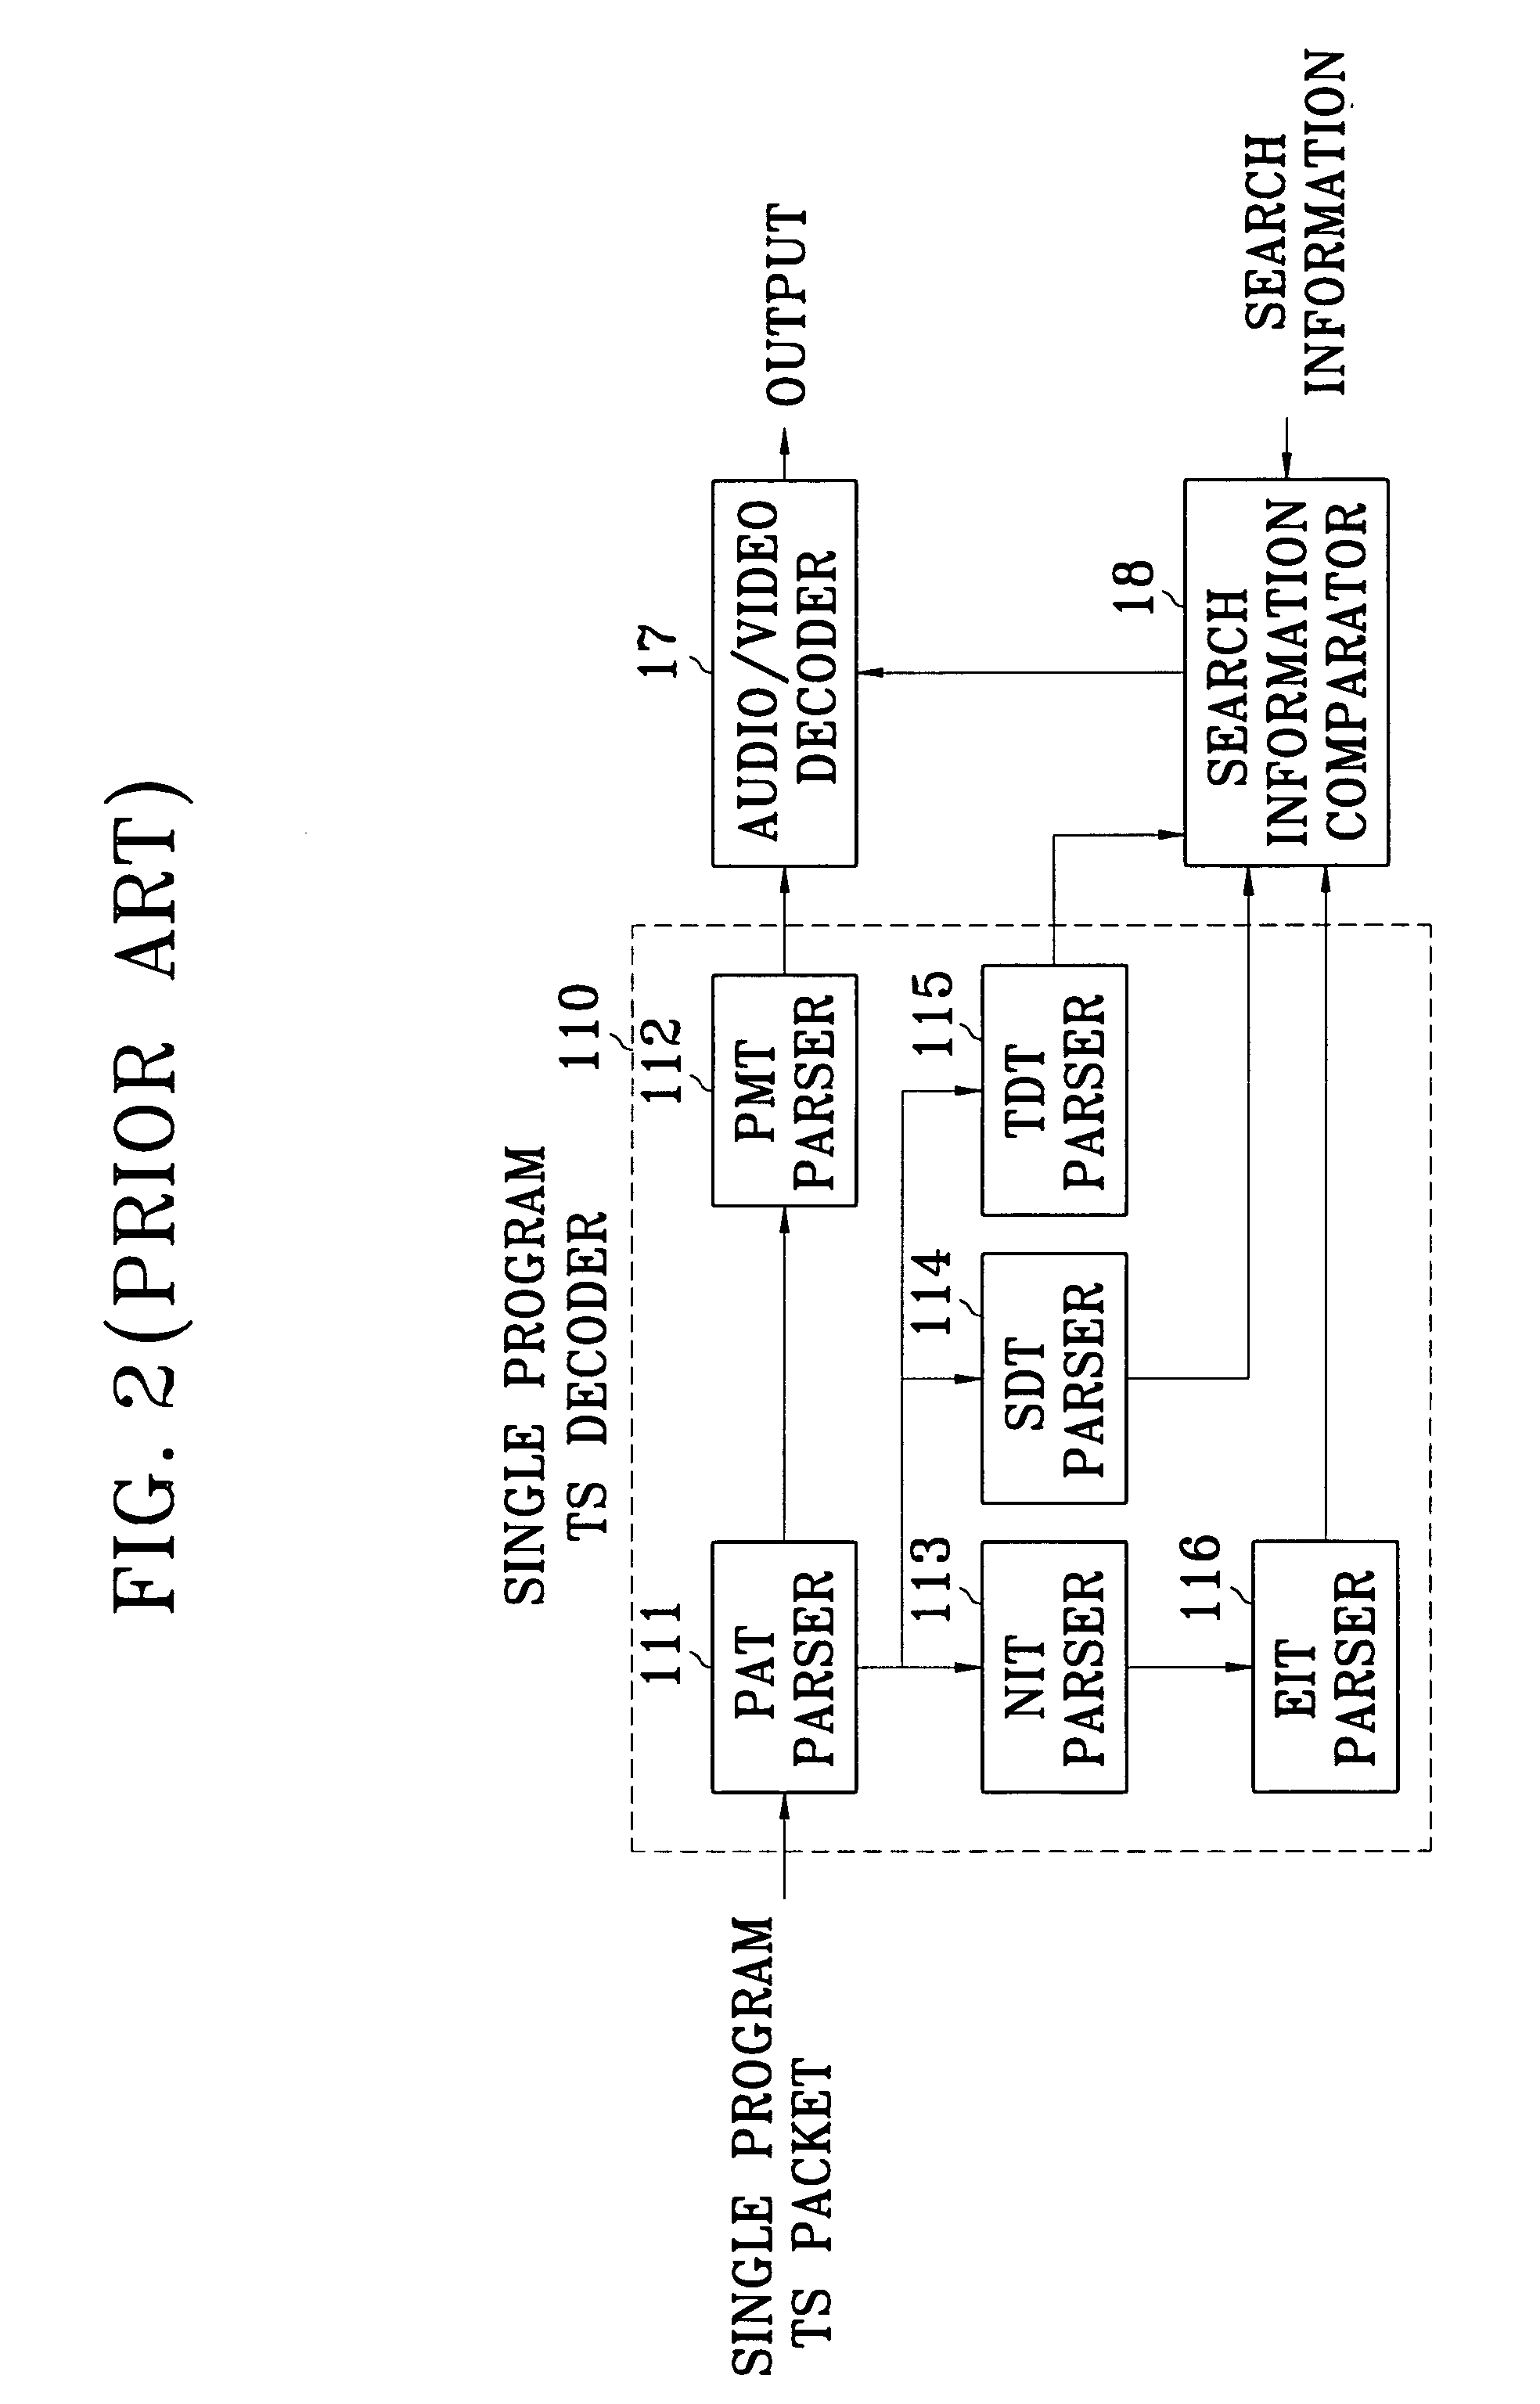 Apparatus for storing and searching audio/video data containing additional information